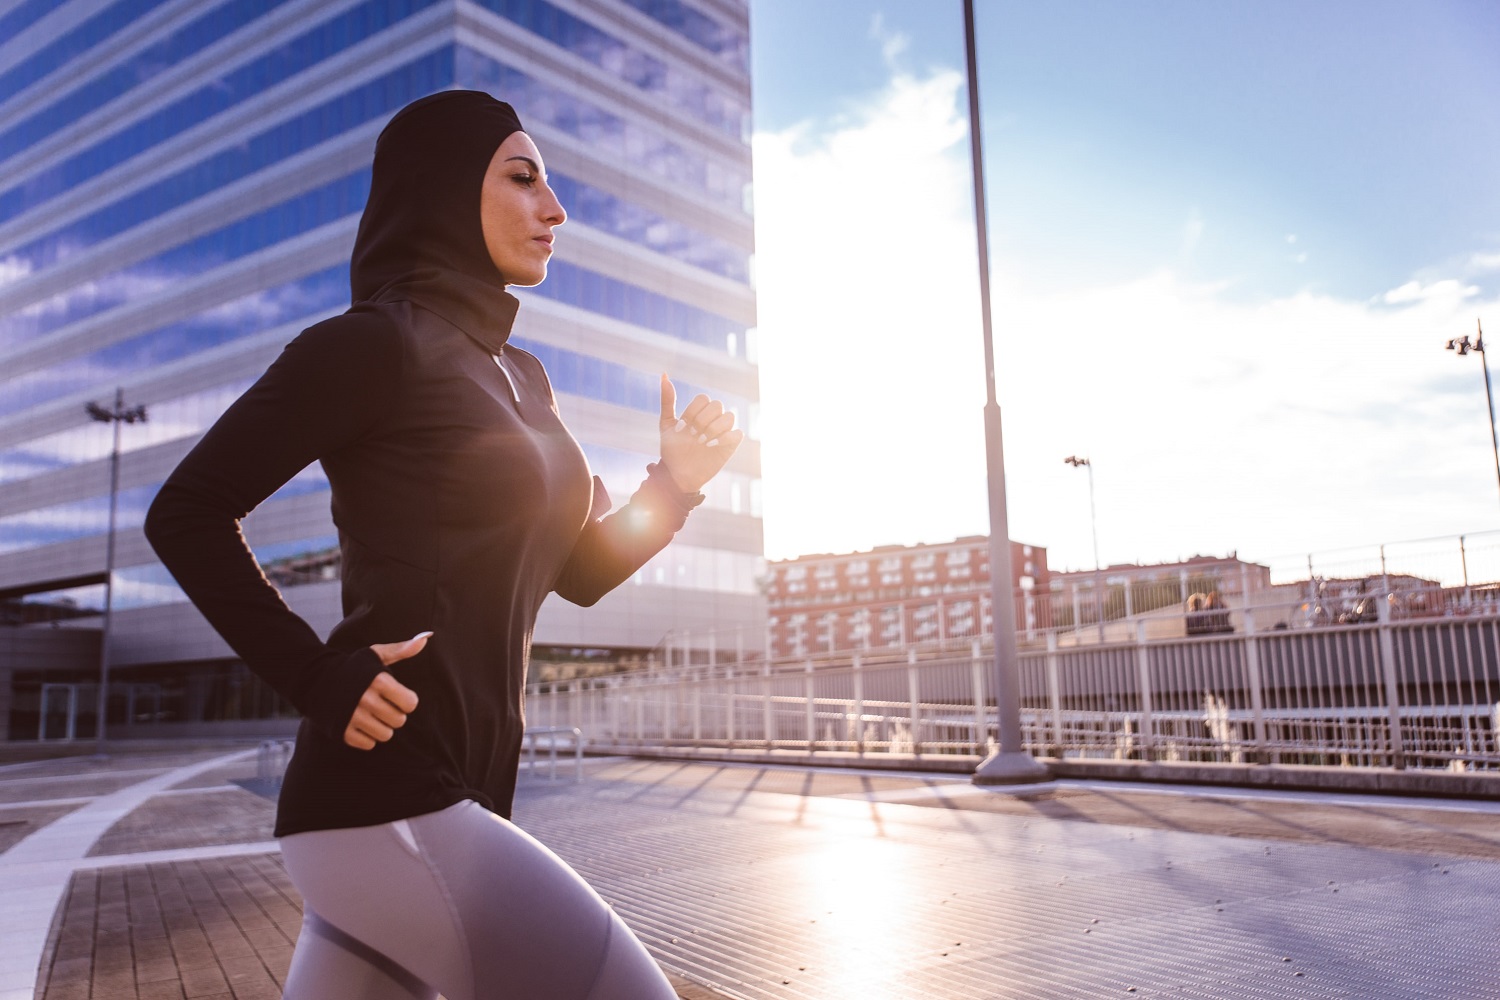 The requirements that you MUST fulfill when running a fitness center in Dubai